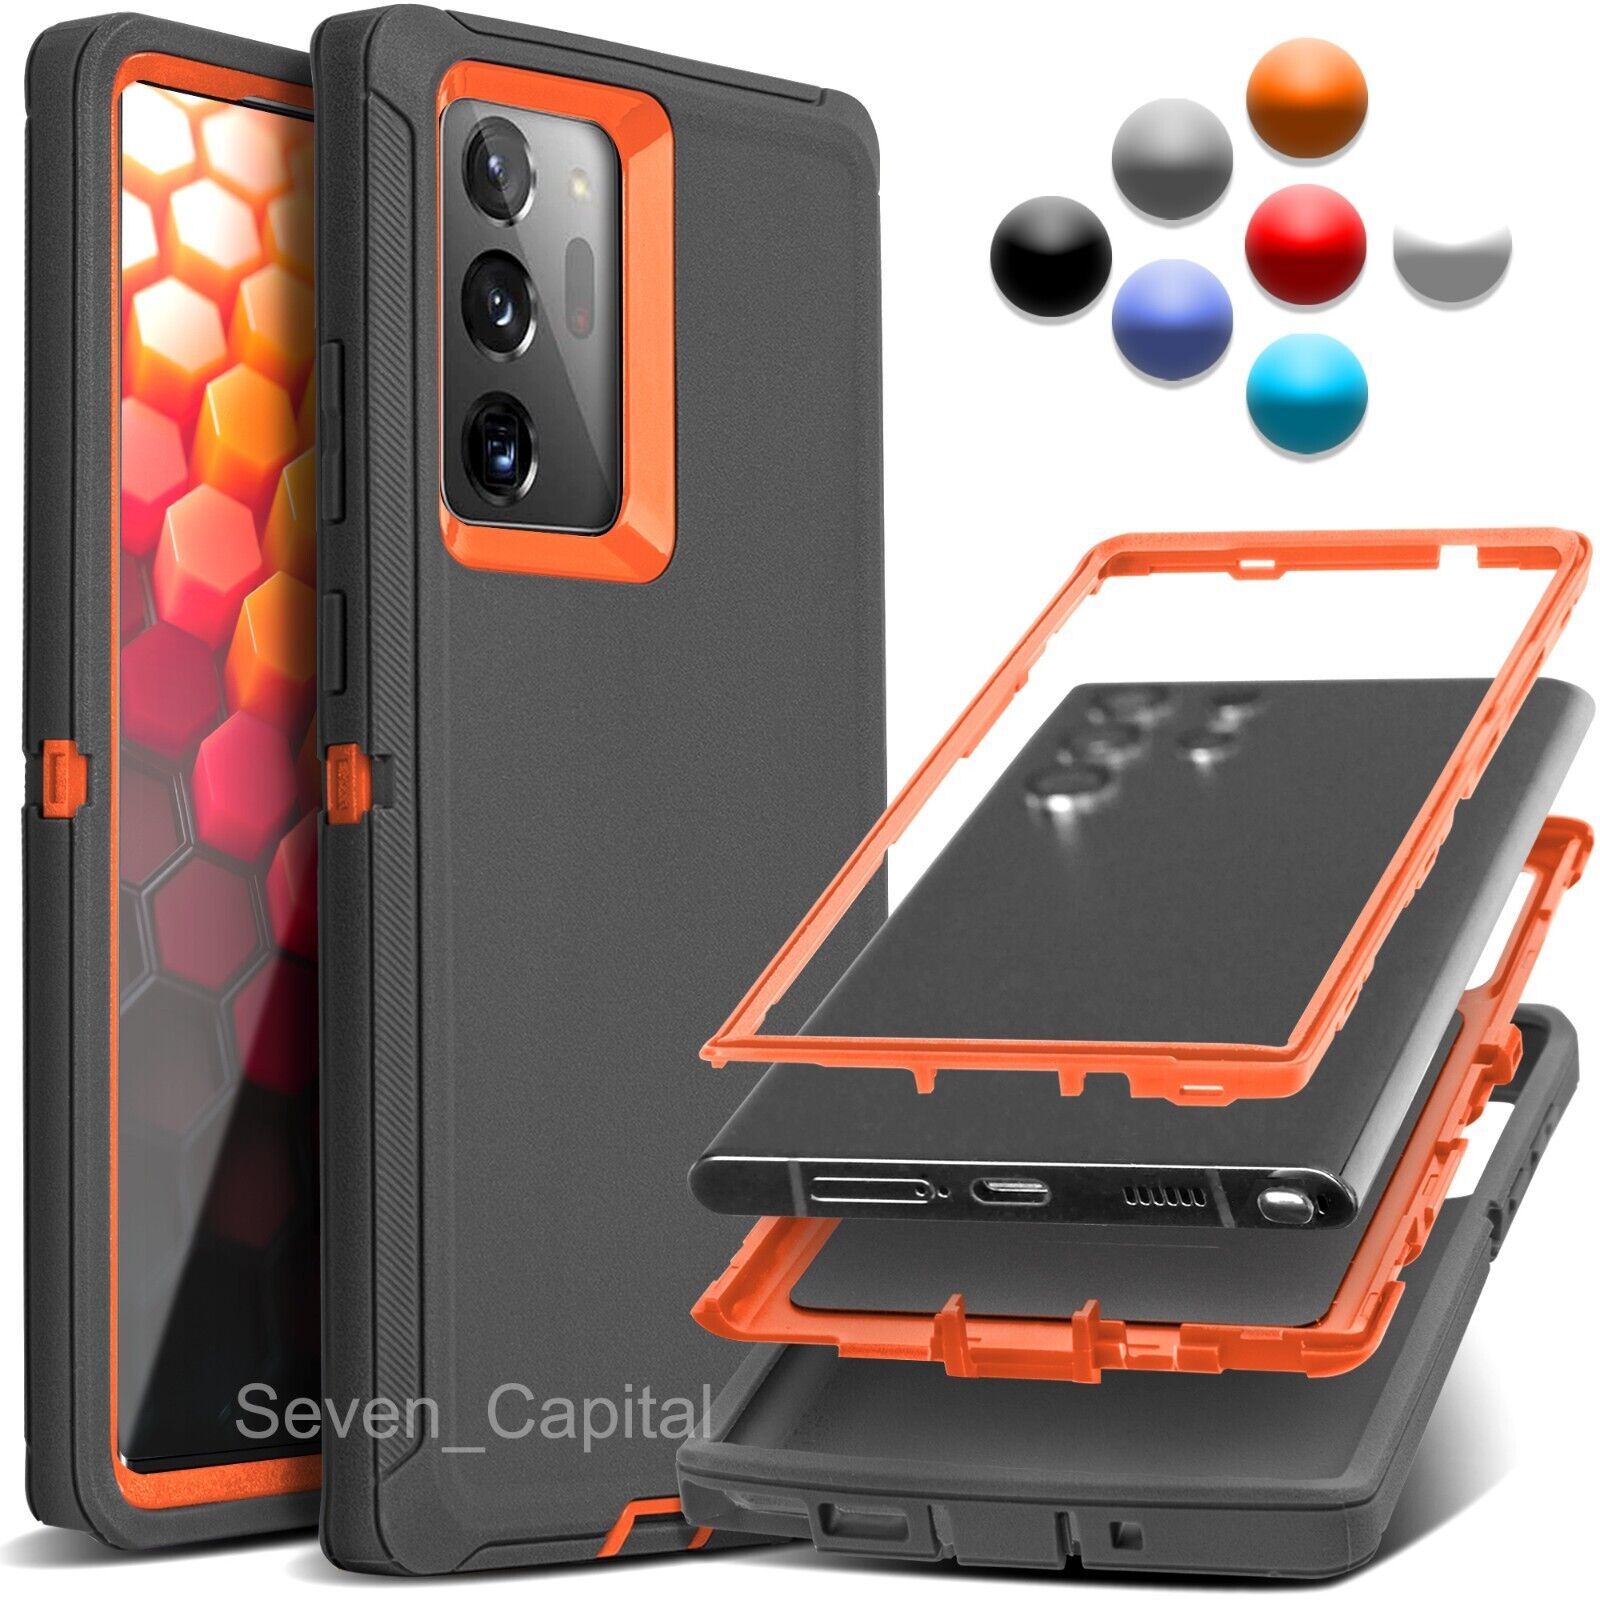 Shockproof Heavy Duty Cases For Samsung Galaxy Note 20 Ultra 10 Plus 9 8 Cover